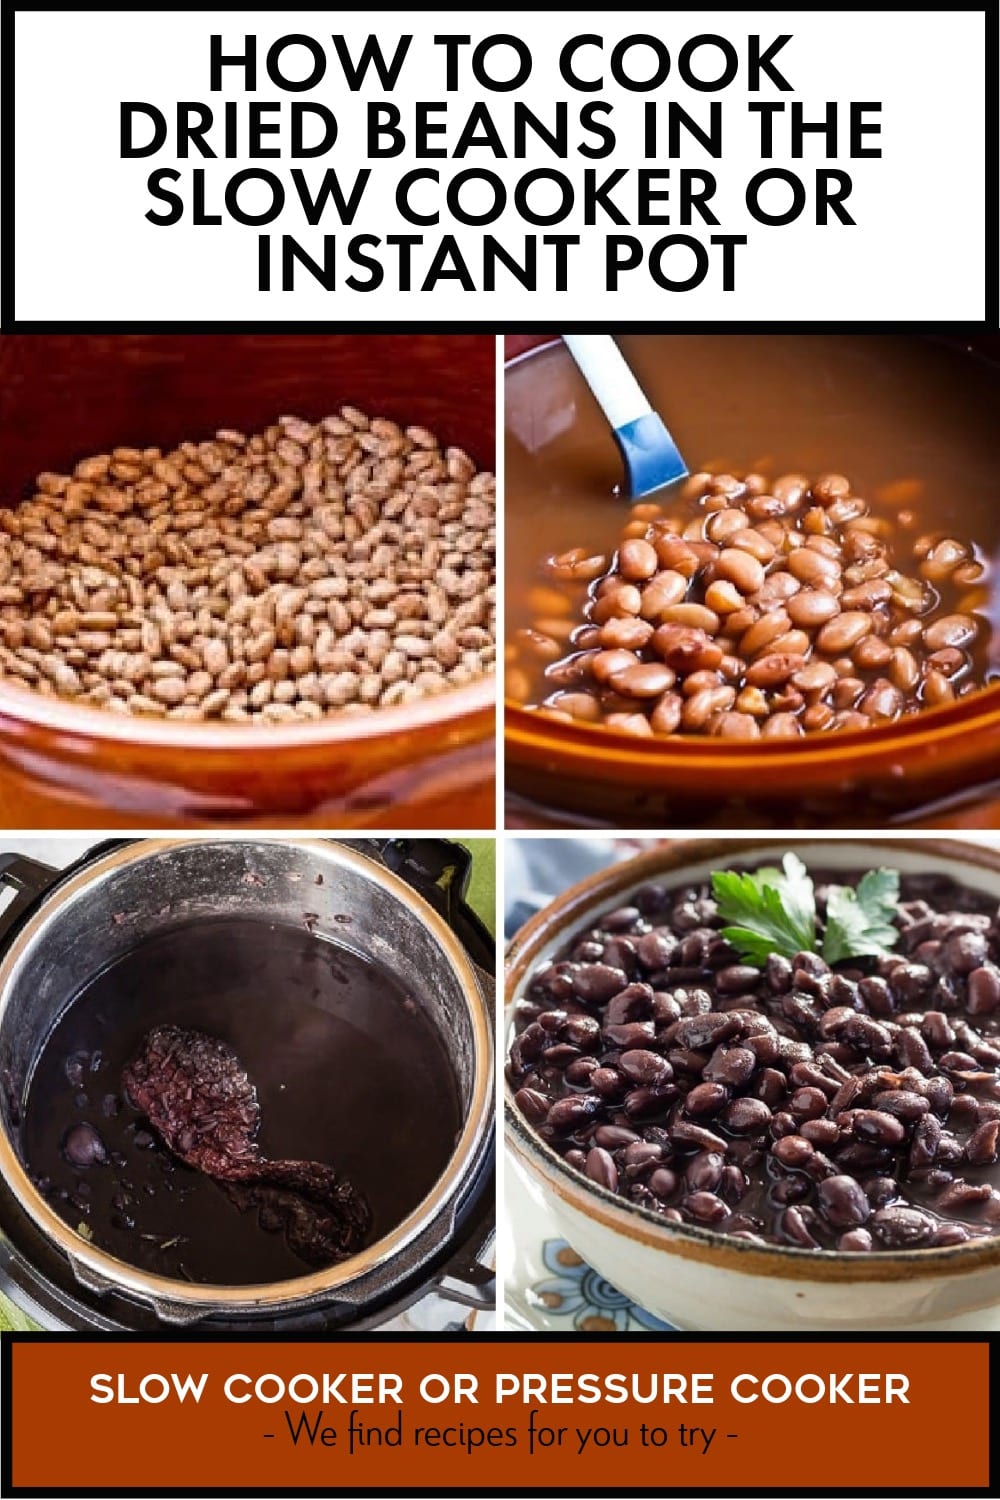 Pinterest image of How to Cook Dried Beans in the Slow Cooker or Instant Pot